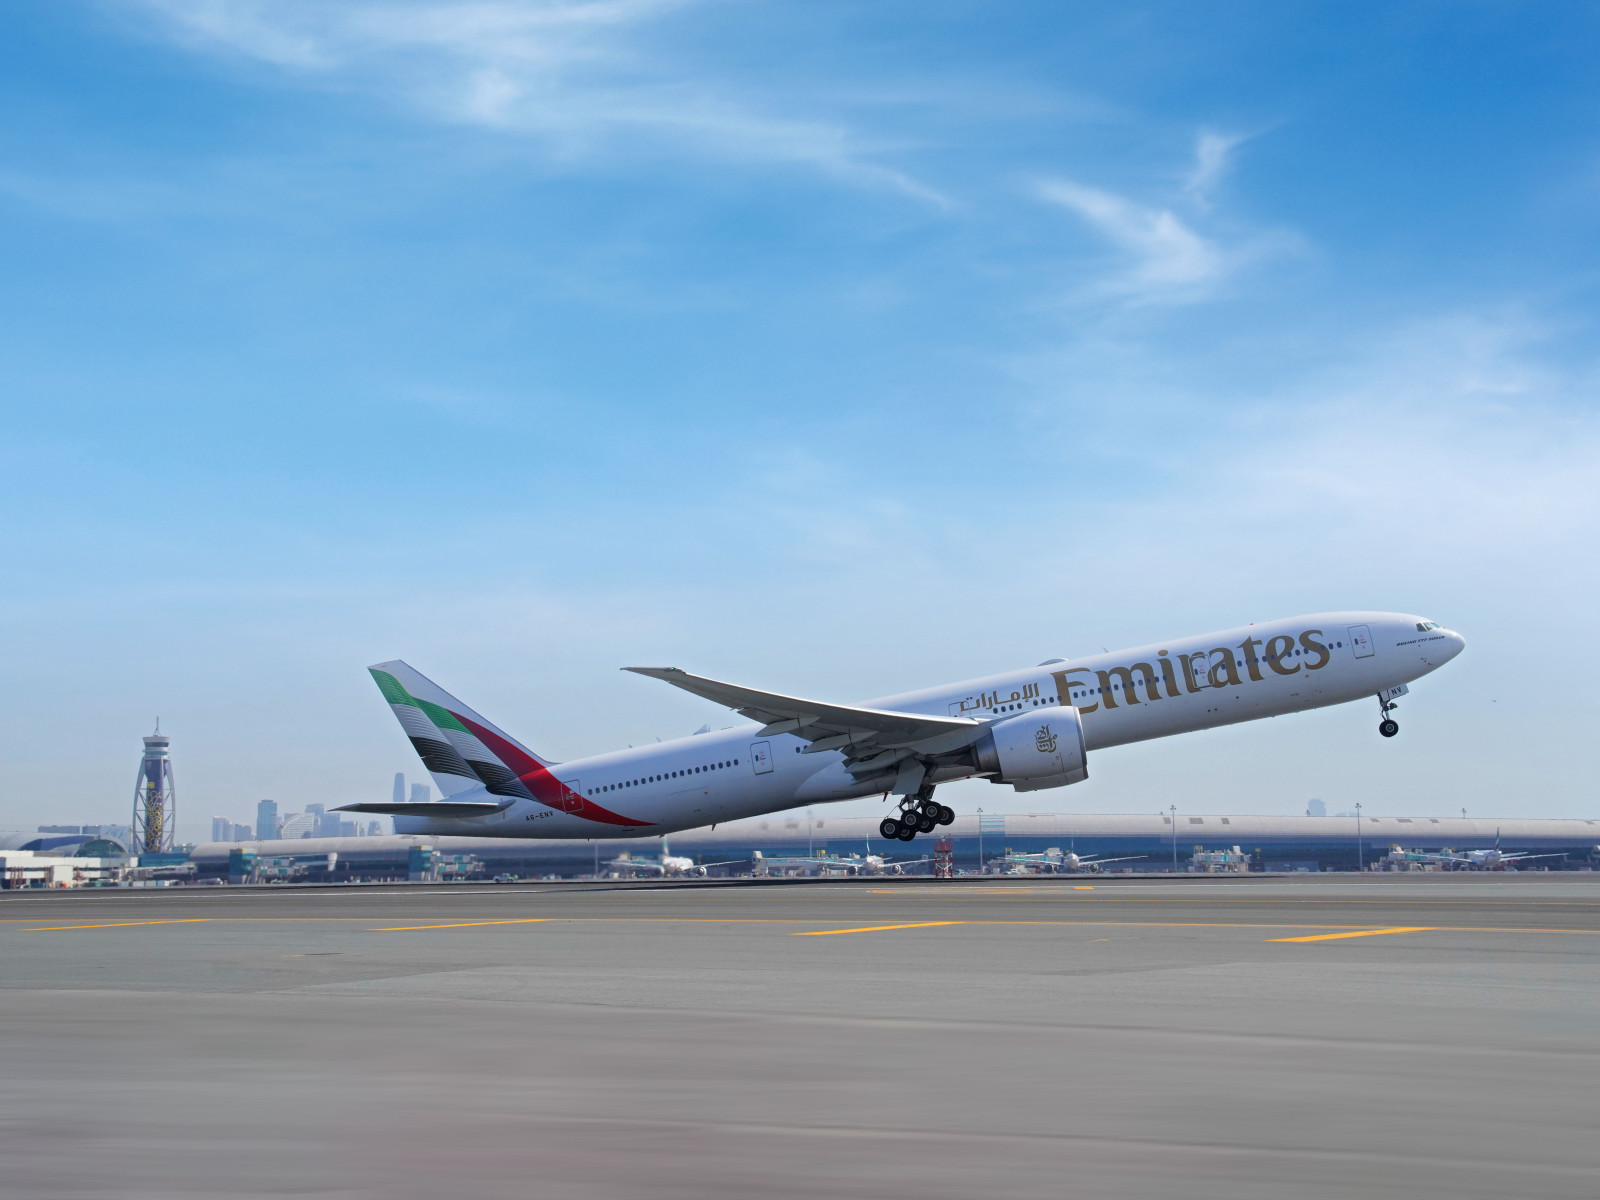 Emirates to scale up London Heathrow flights with additional flights to/from London Heathrow from October